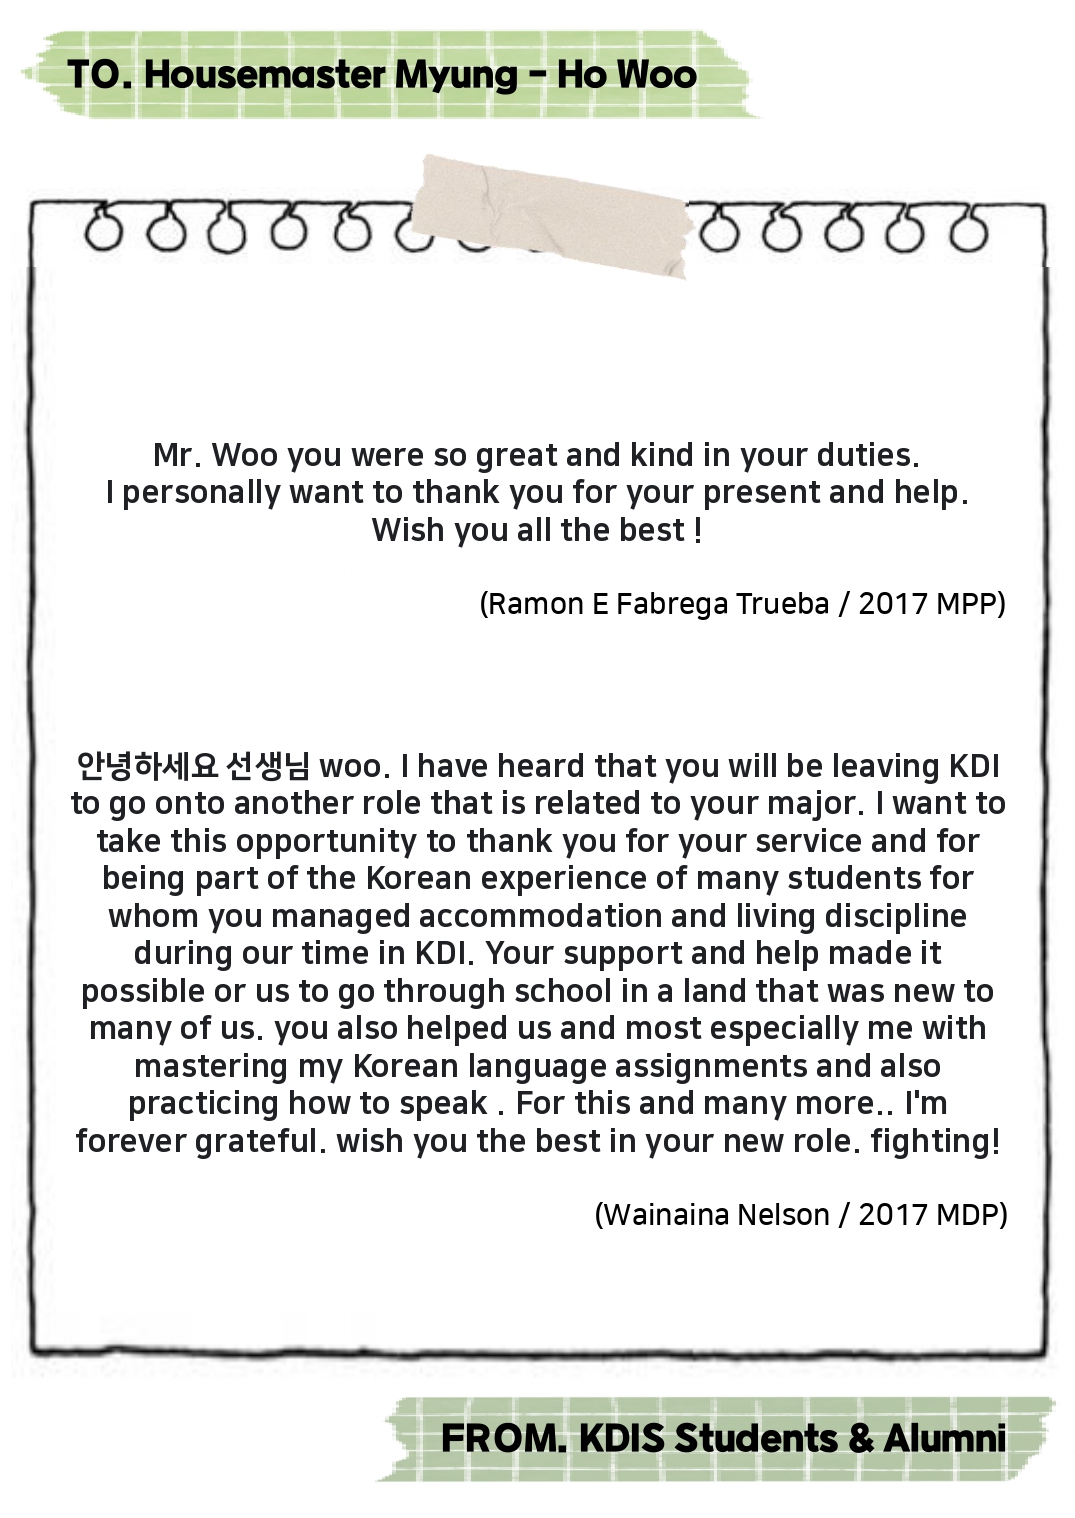 Thank you Housemaster Myung-ho Woo -Messages from KDIS Students and Alumni 사진22